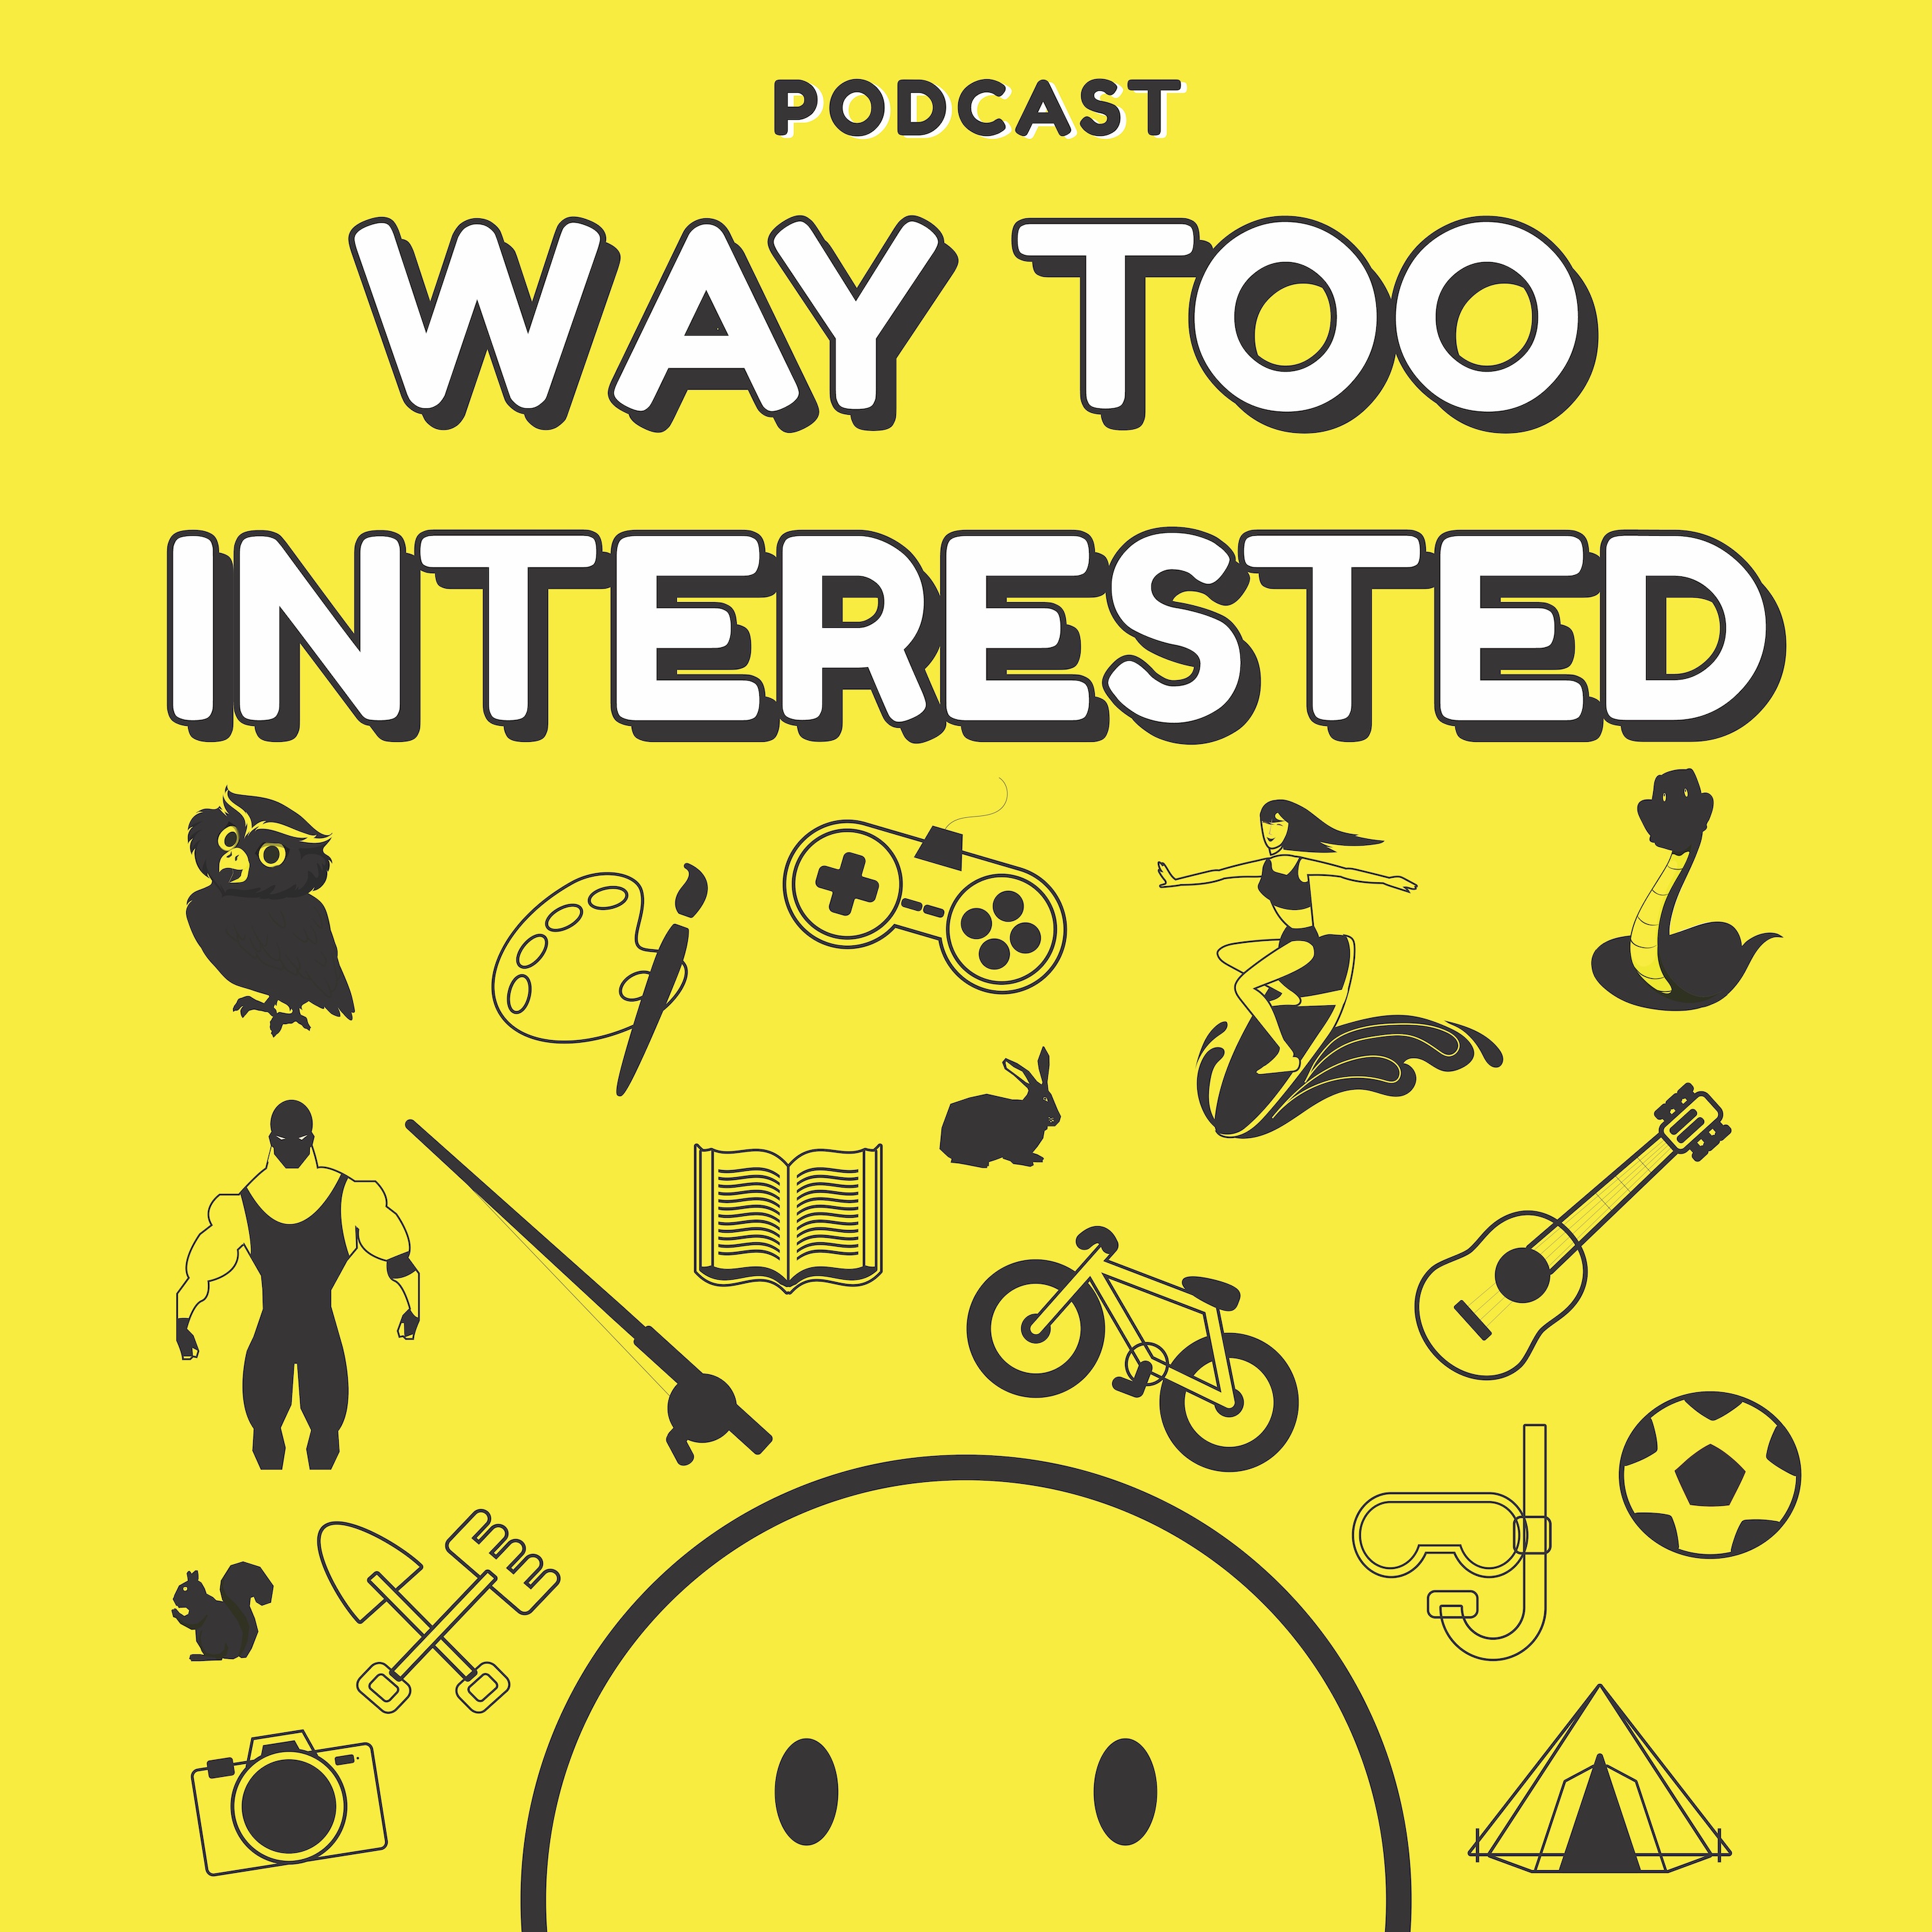 Artwork for podcast Way Too Interested